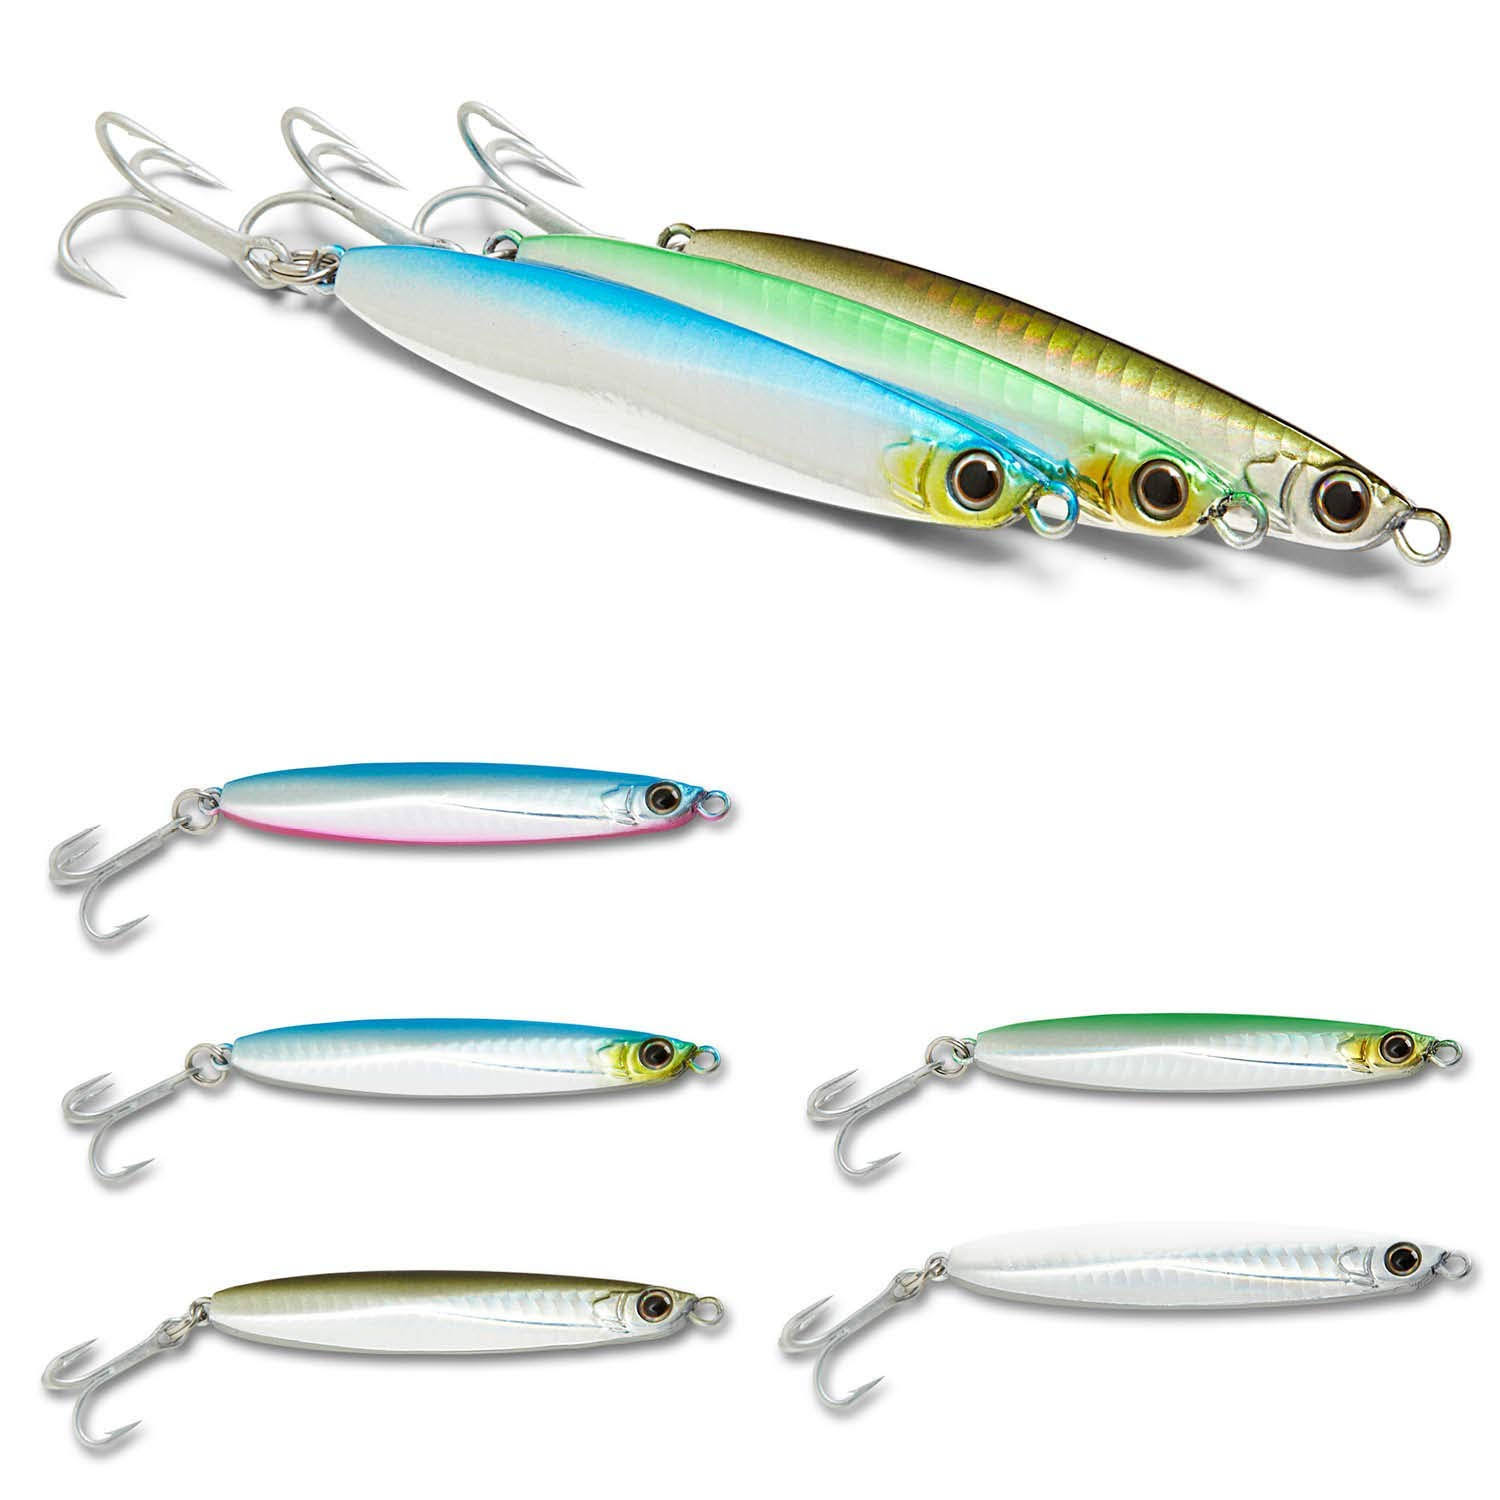 Shimano Coltsniper Jig Slow Fall Lure | Boating & Fishing | Best Price Guarantee | Free Shipping On All Orders | 30 Day Money Back Guarantee